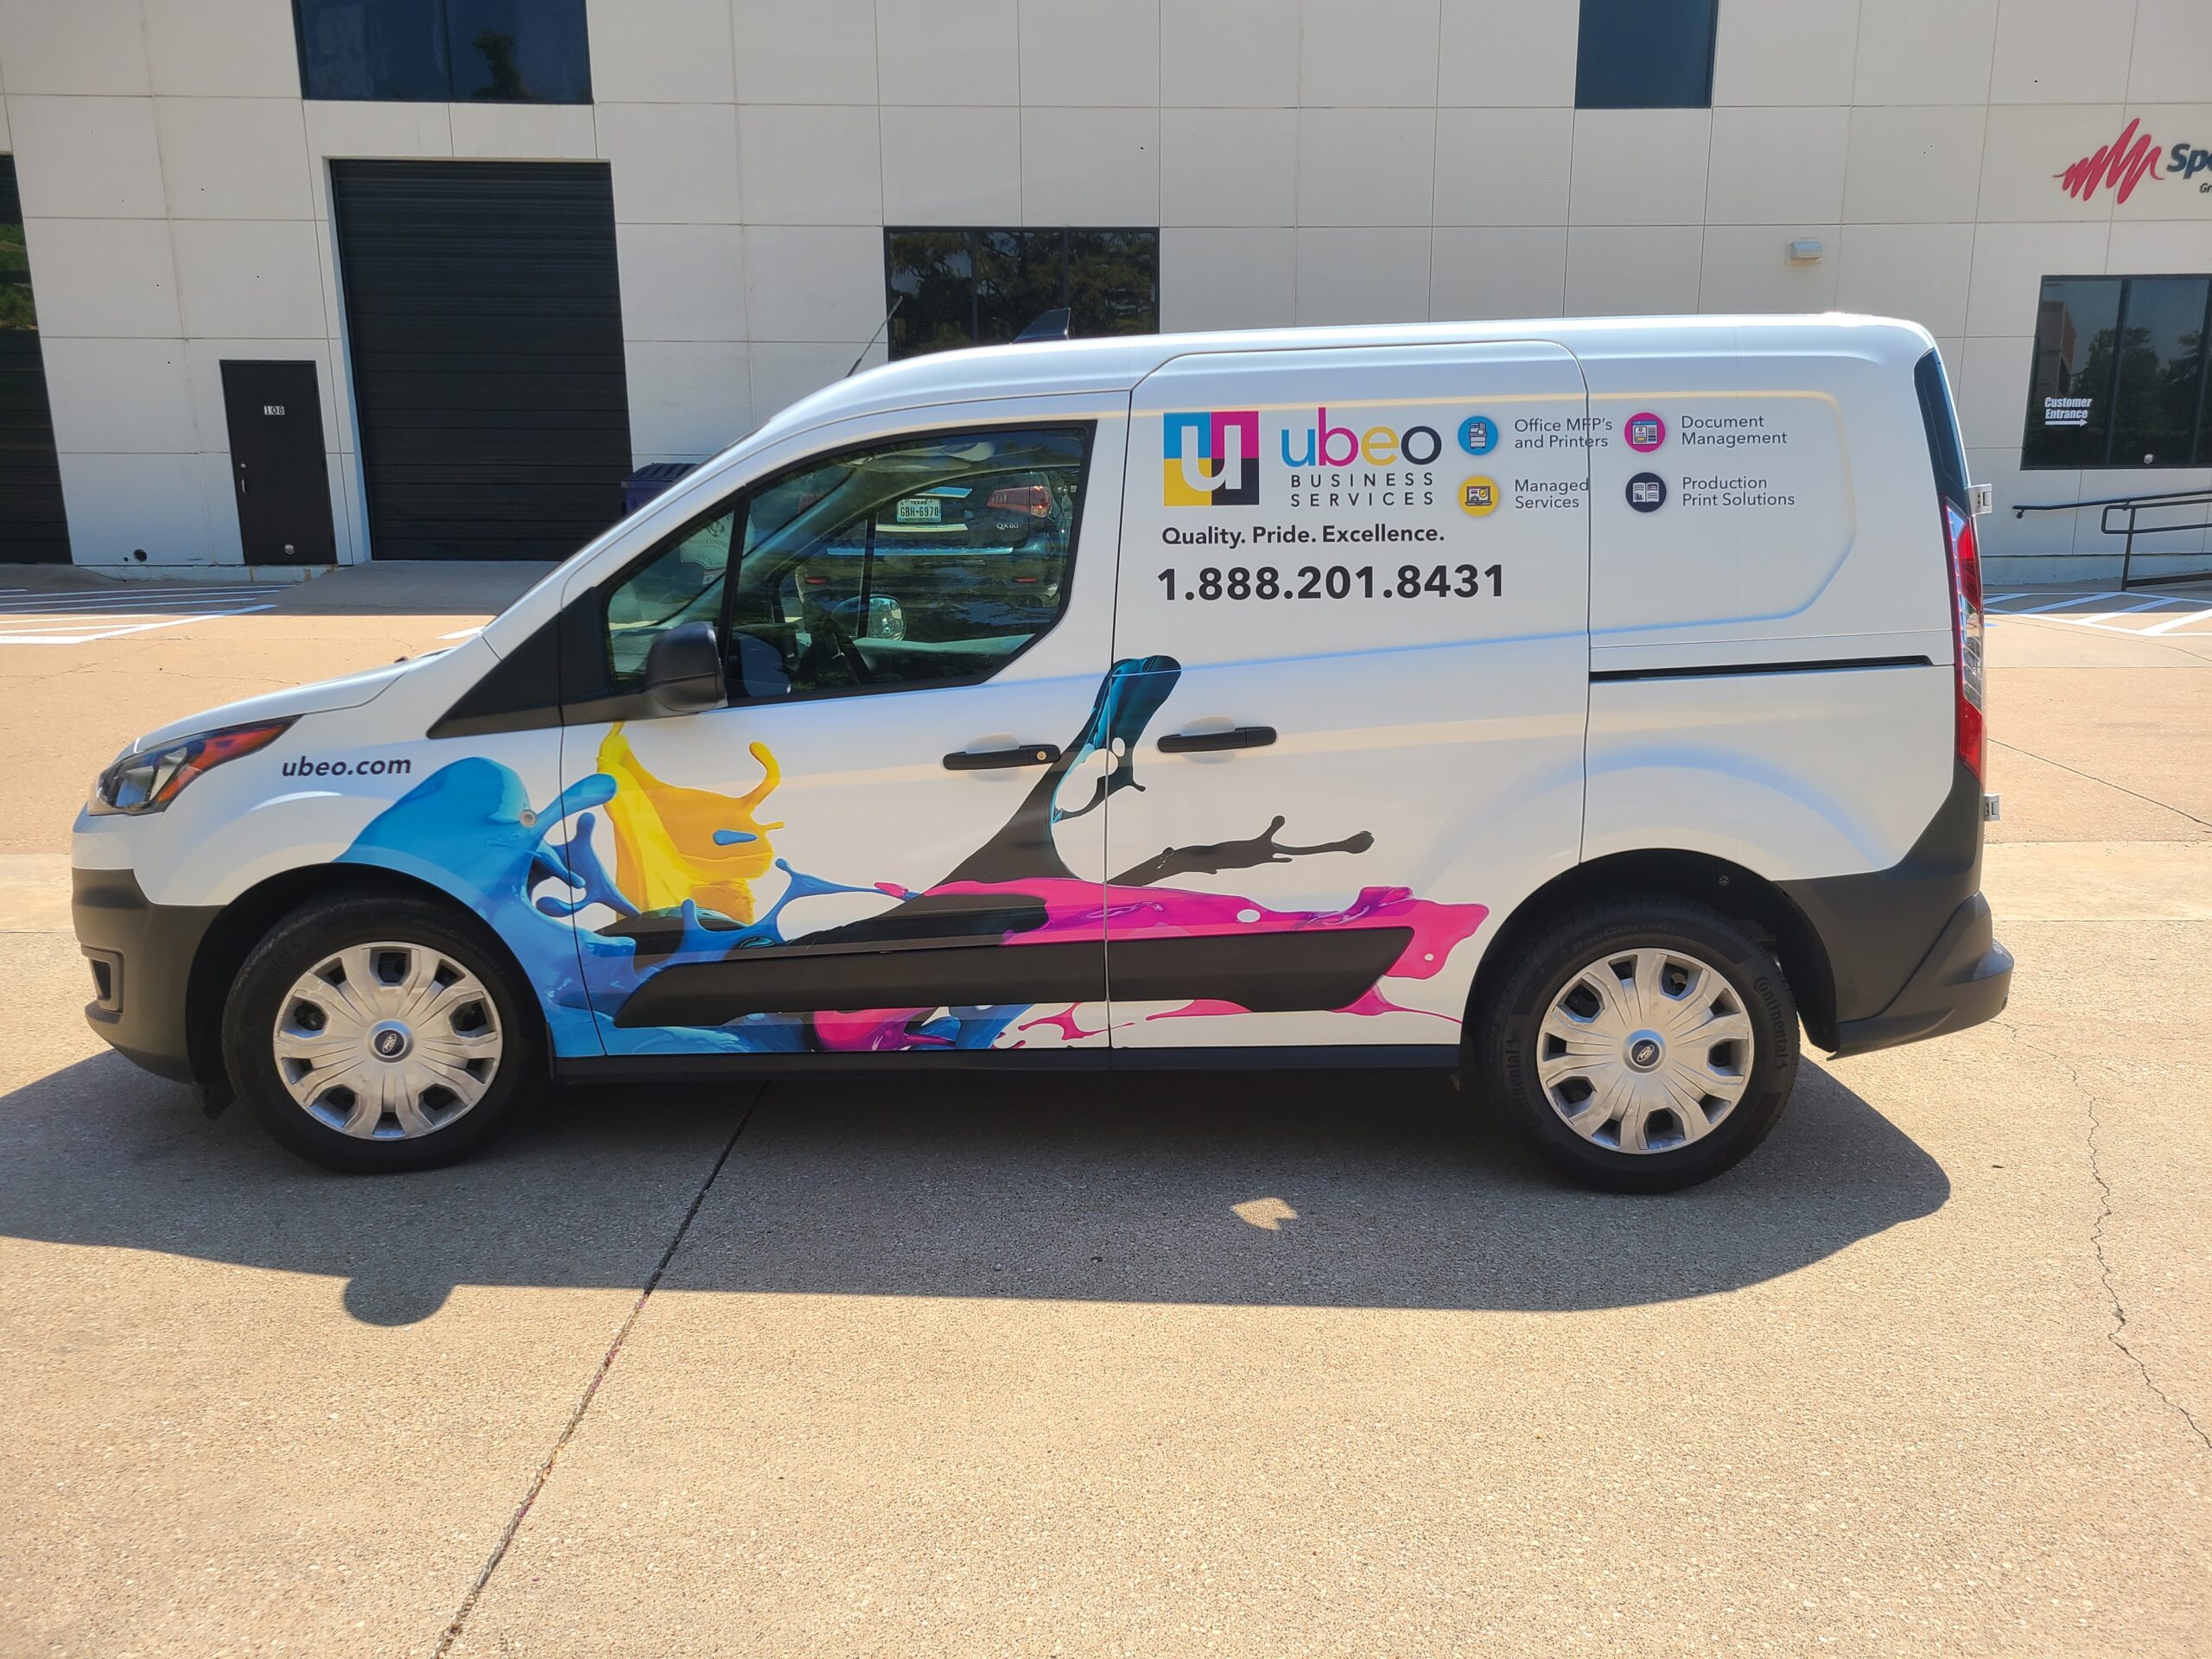 Full commercial vehicle wrap with company logo and colorful graphics